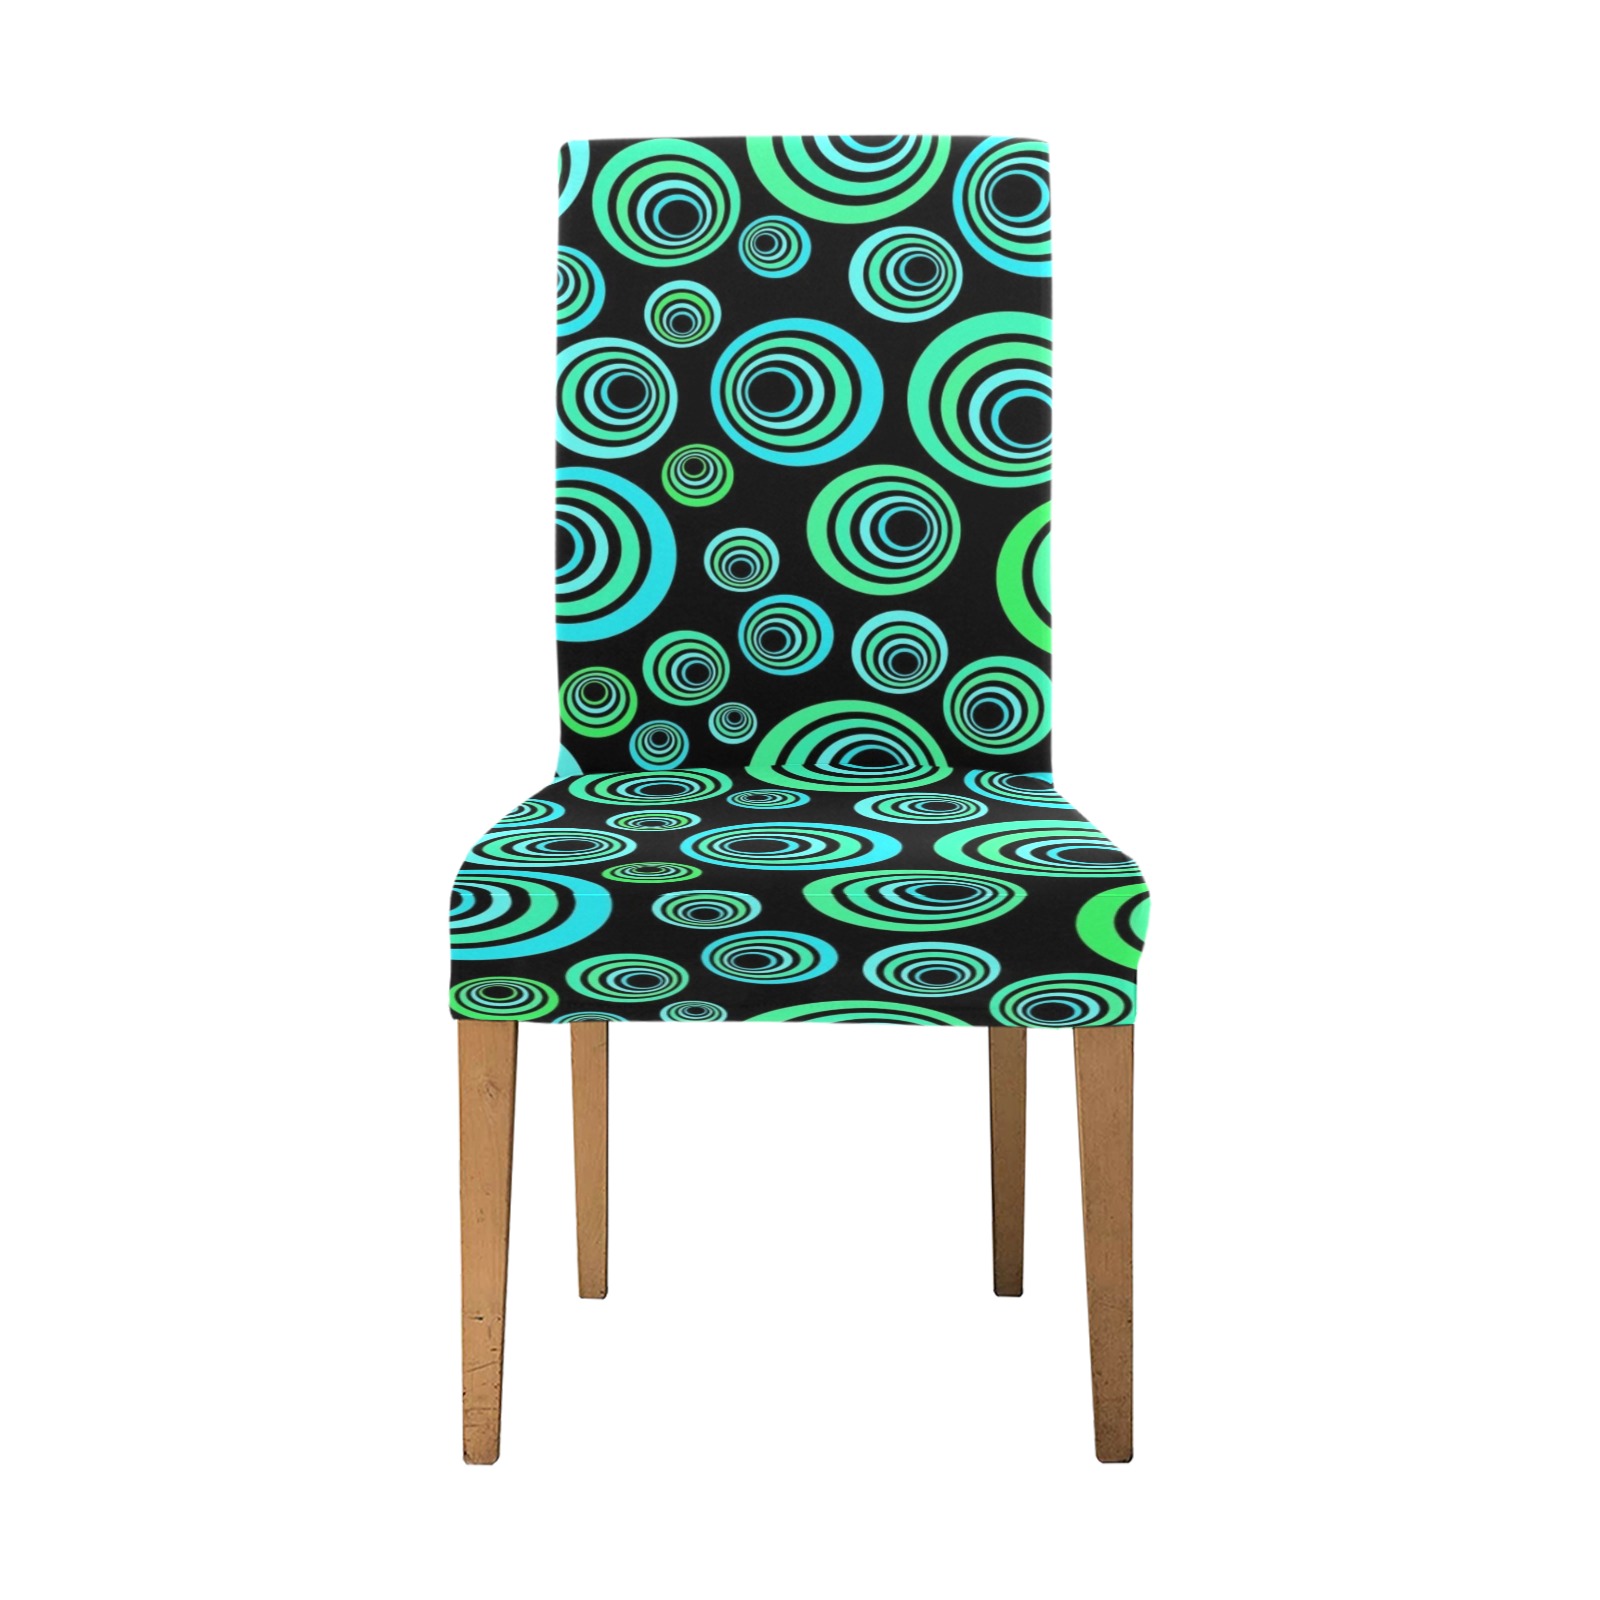 Retro Psychedelic Pretty Green Pattern Removable Dining Chair Cover